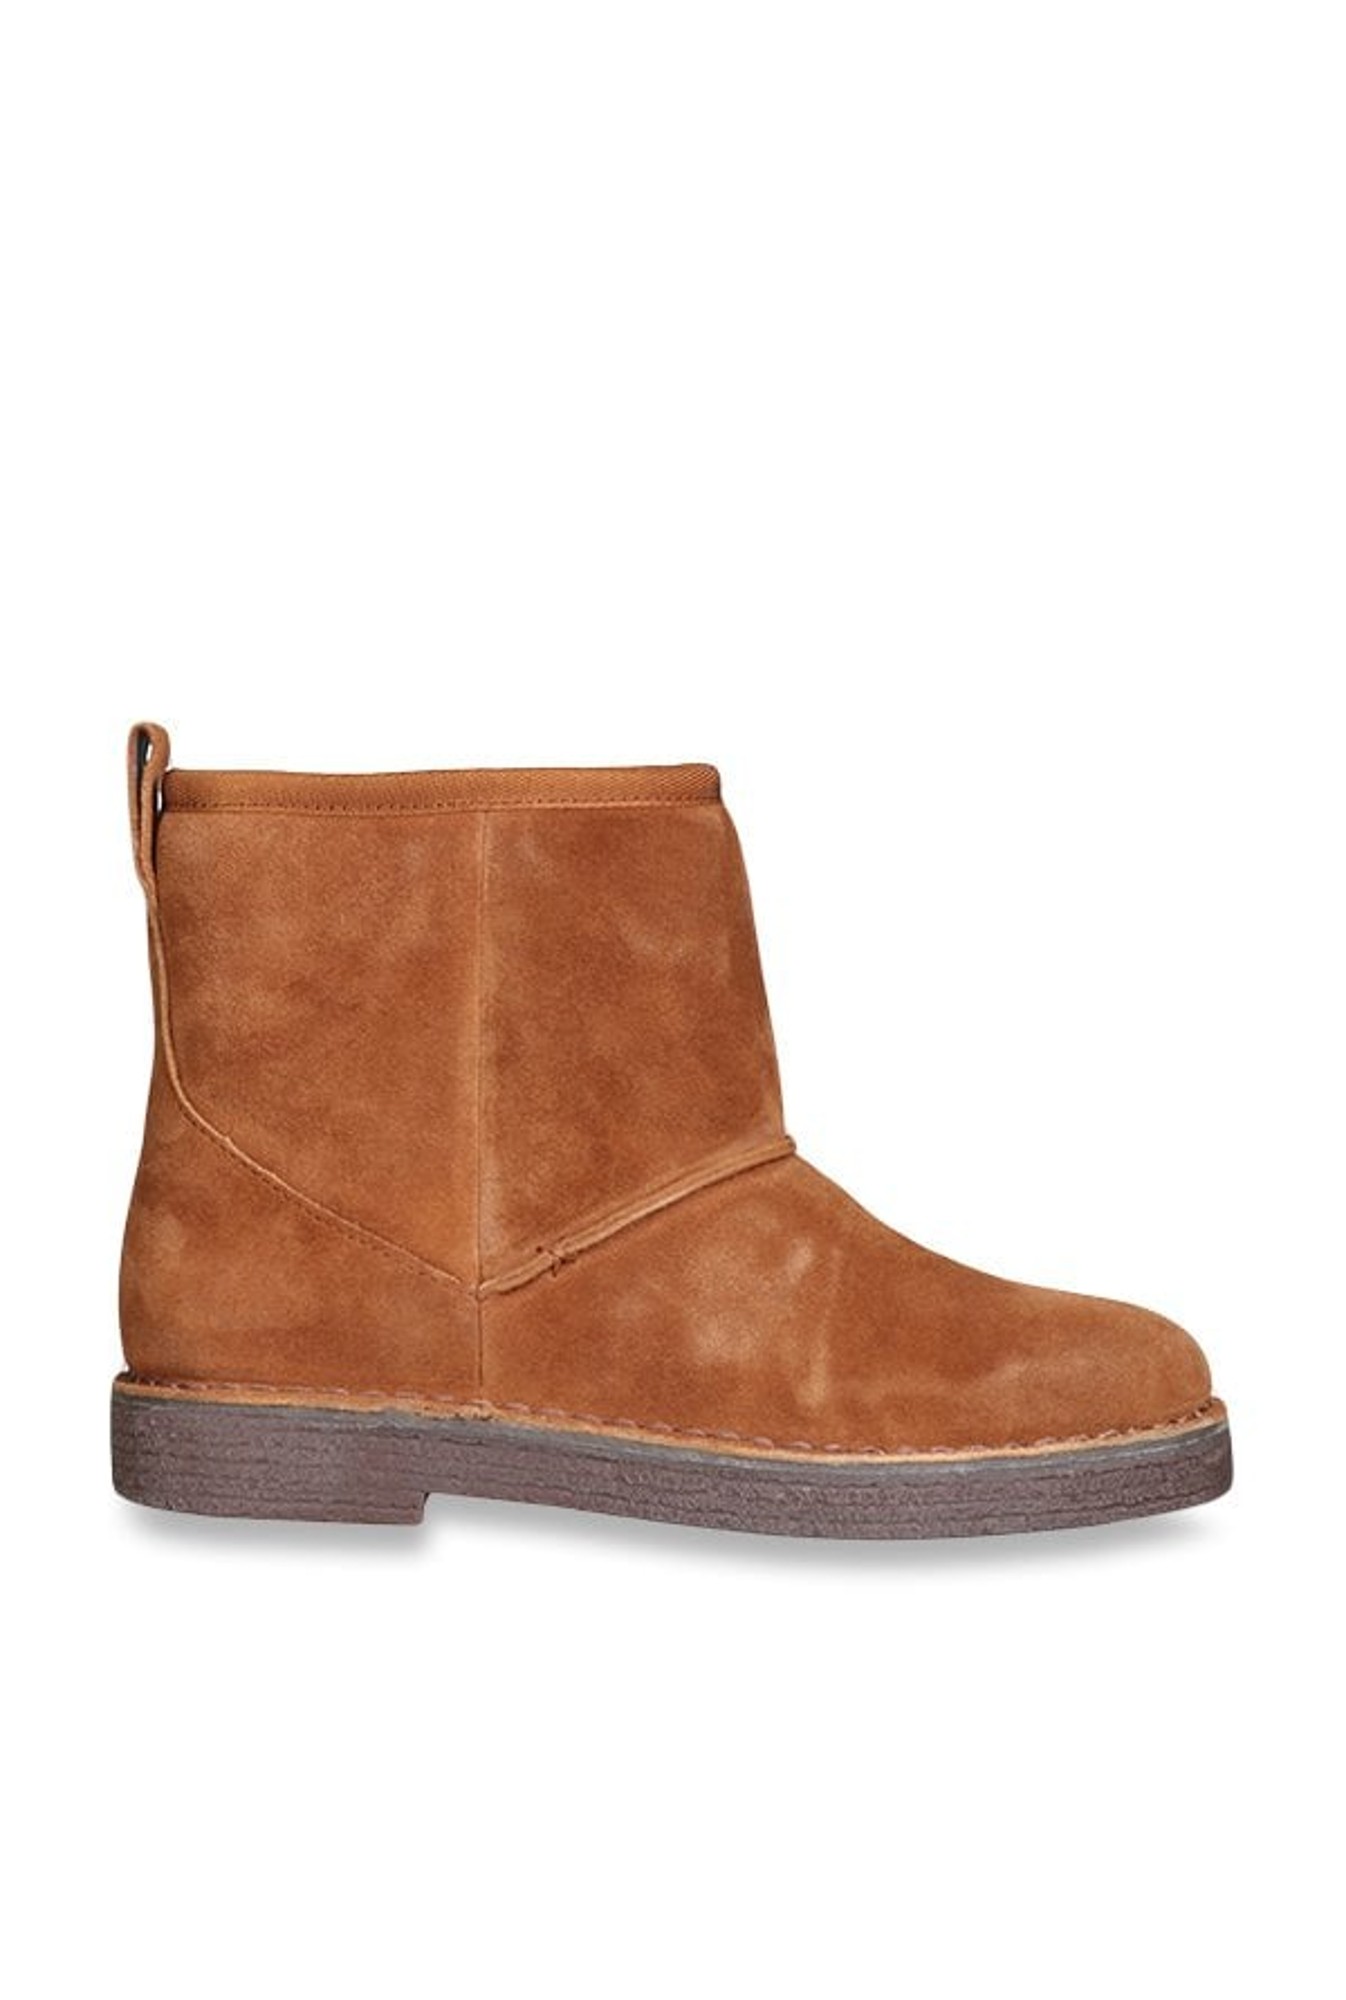 clarks drafty day boots